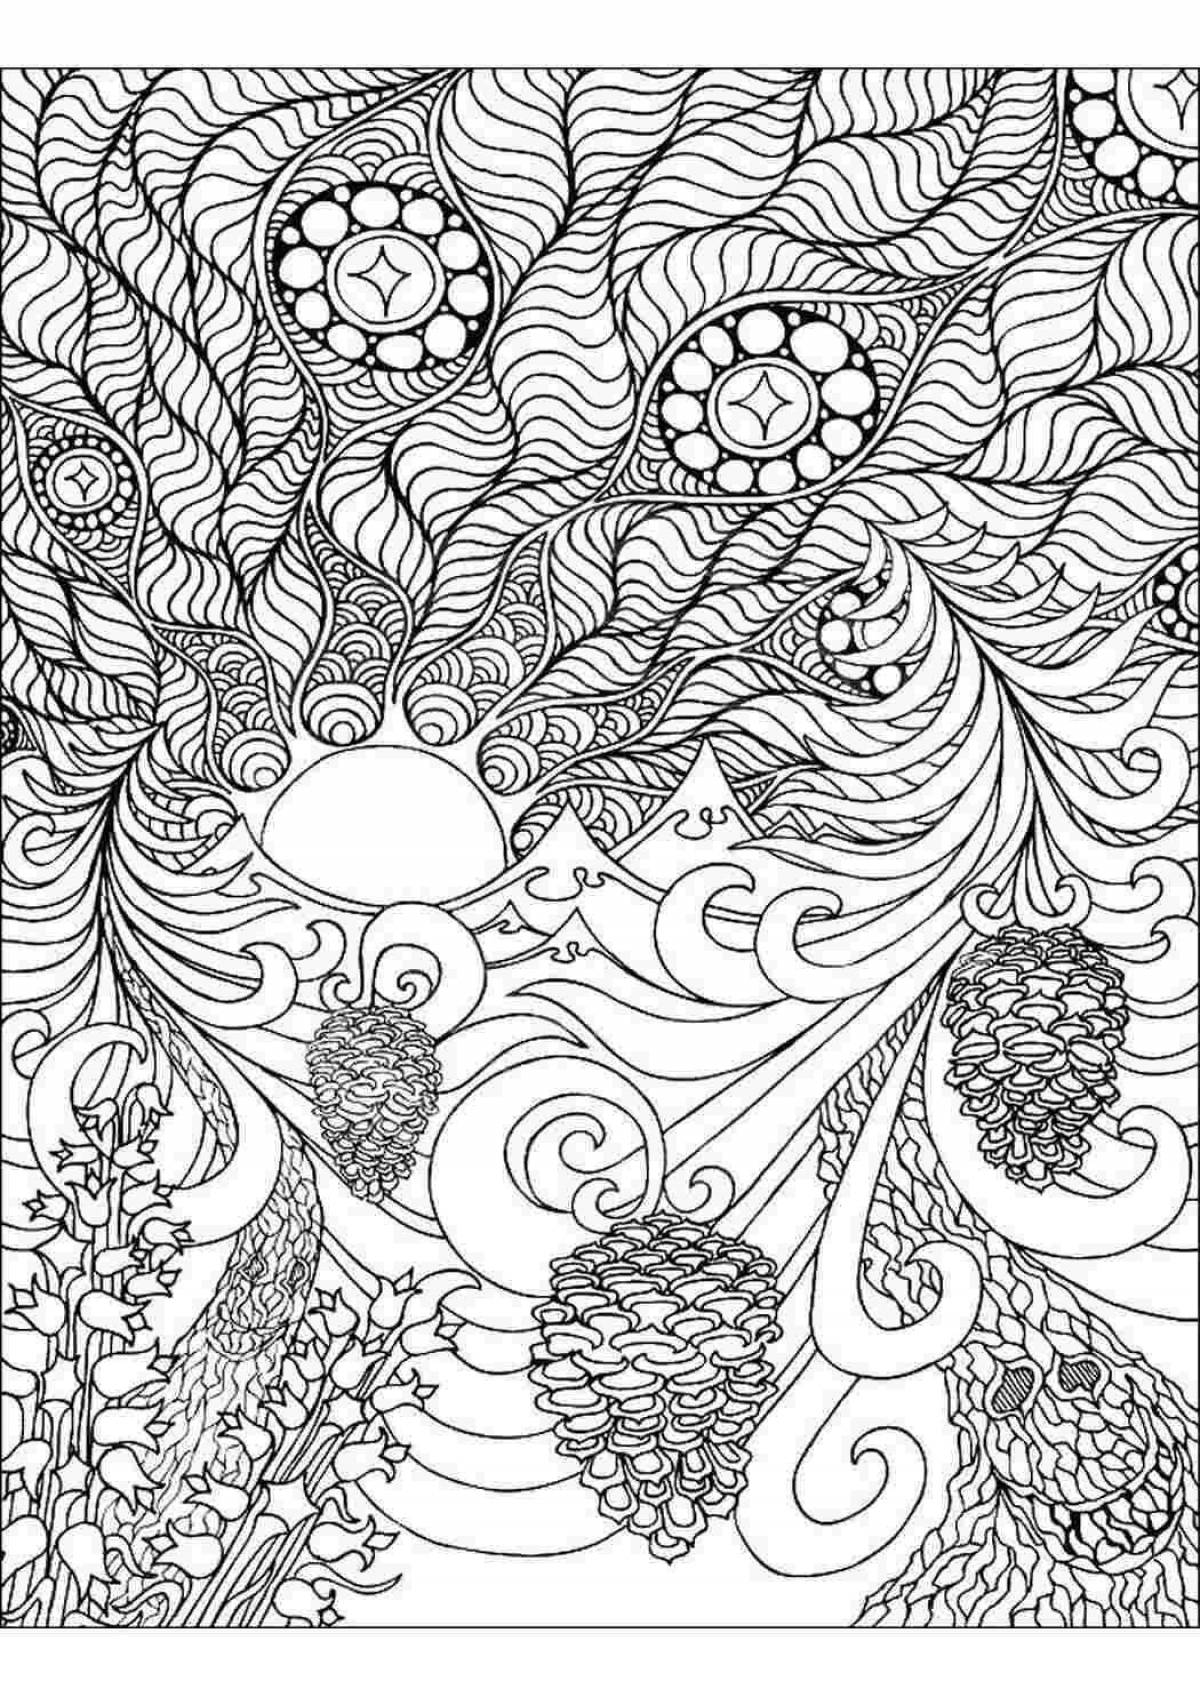 Peace coloring art therapy for adults